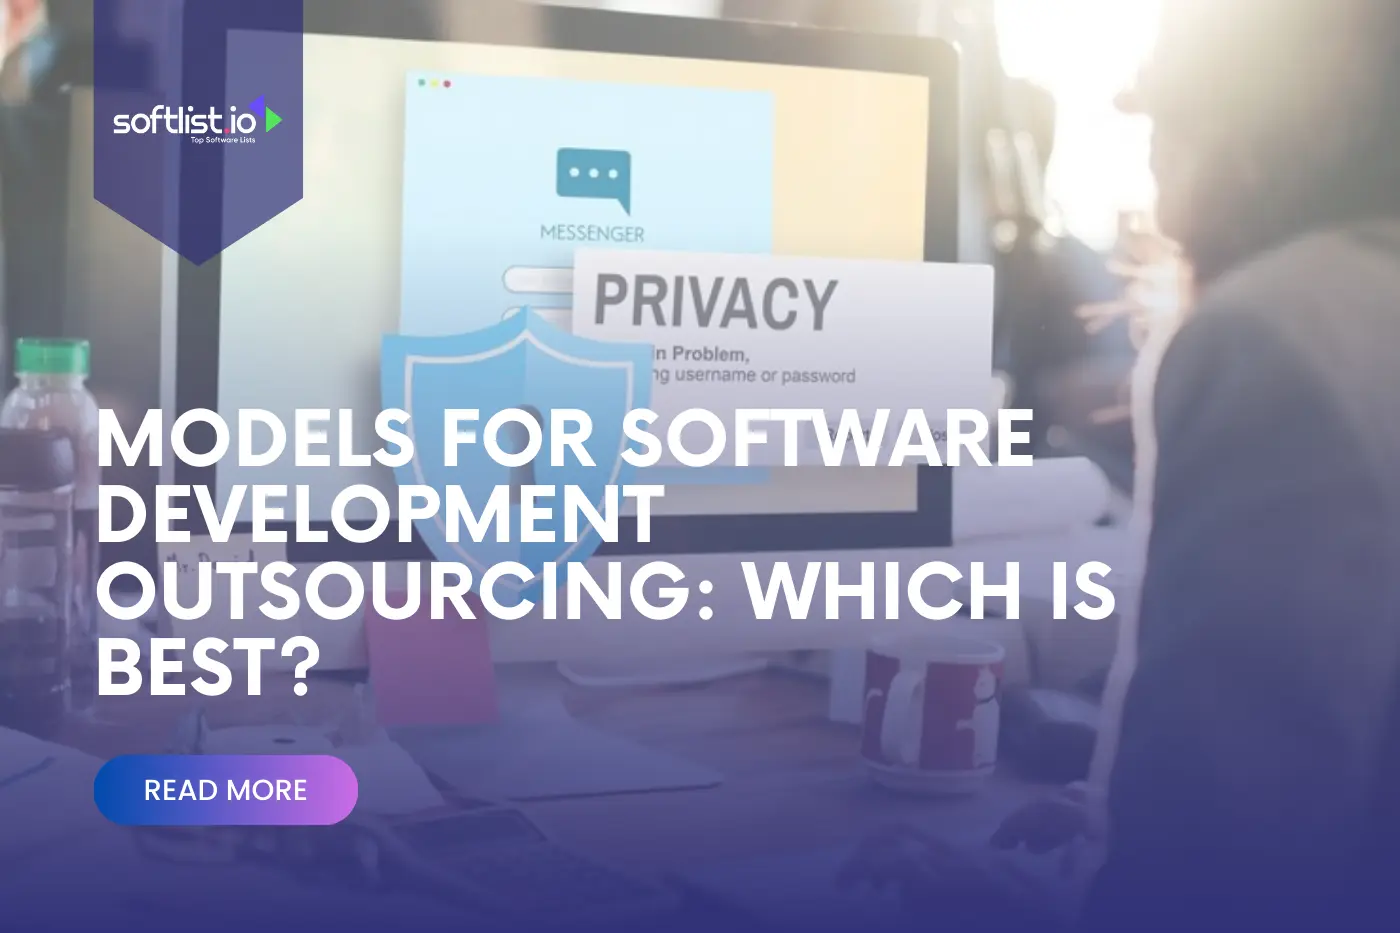 Models for Software Development Outsourcing